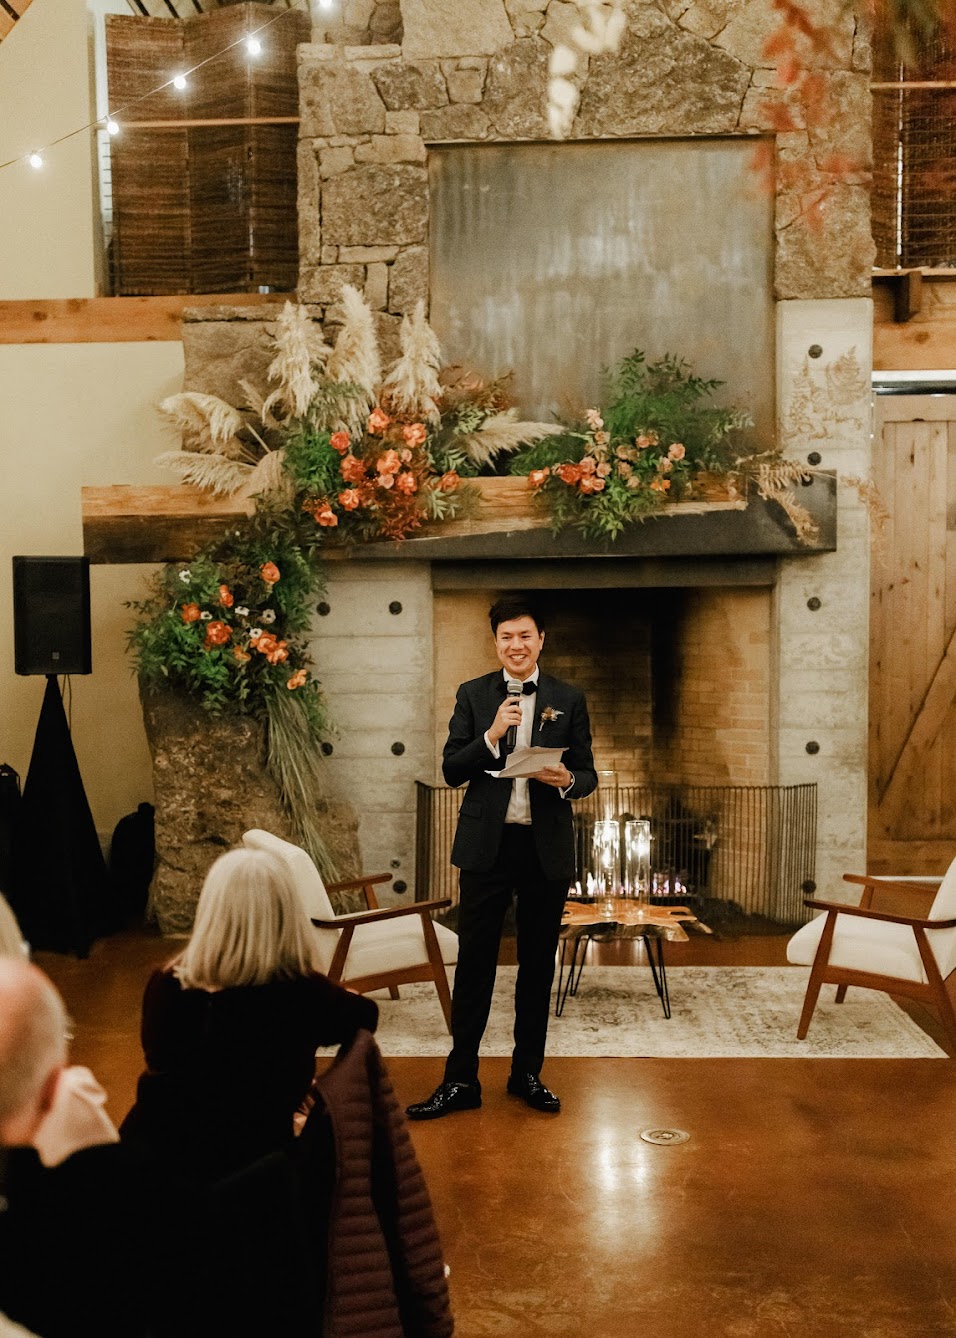 The groom standing in front of the fireplace giving a speech.